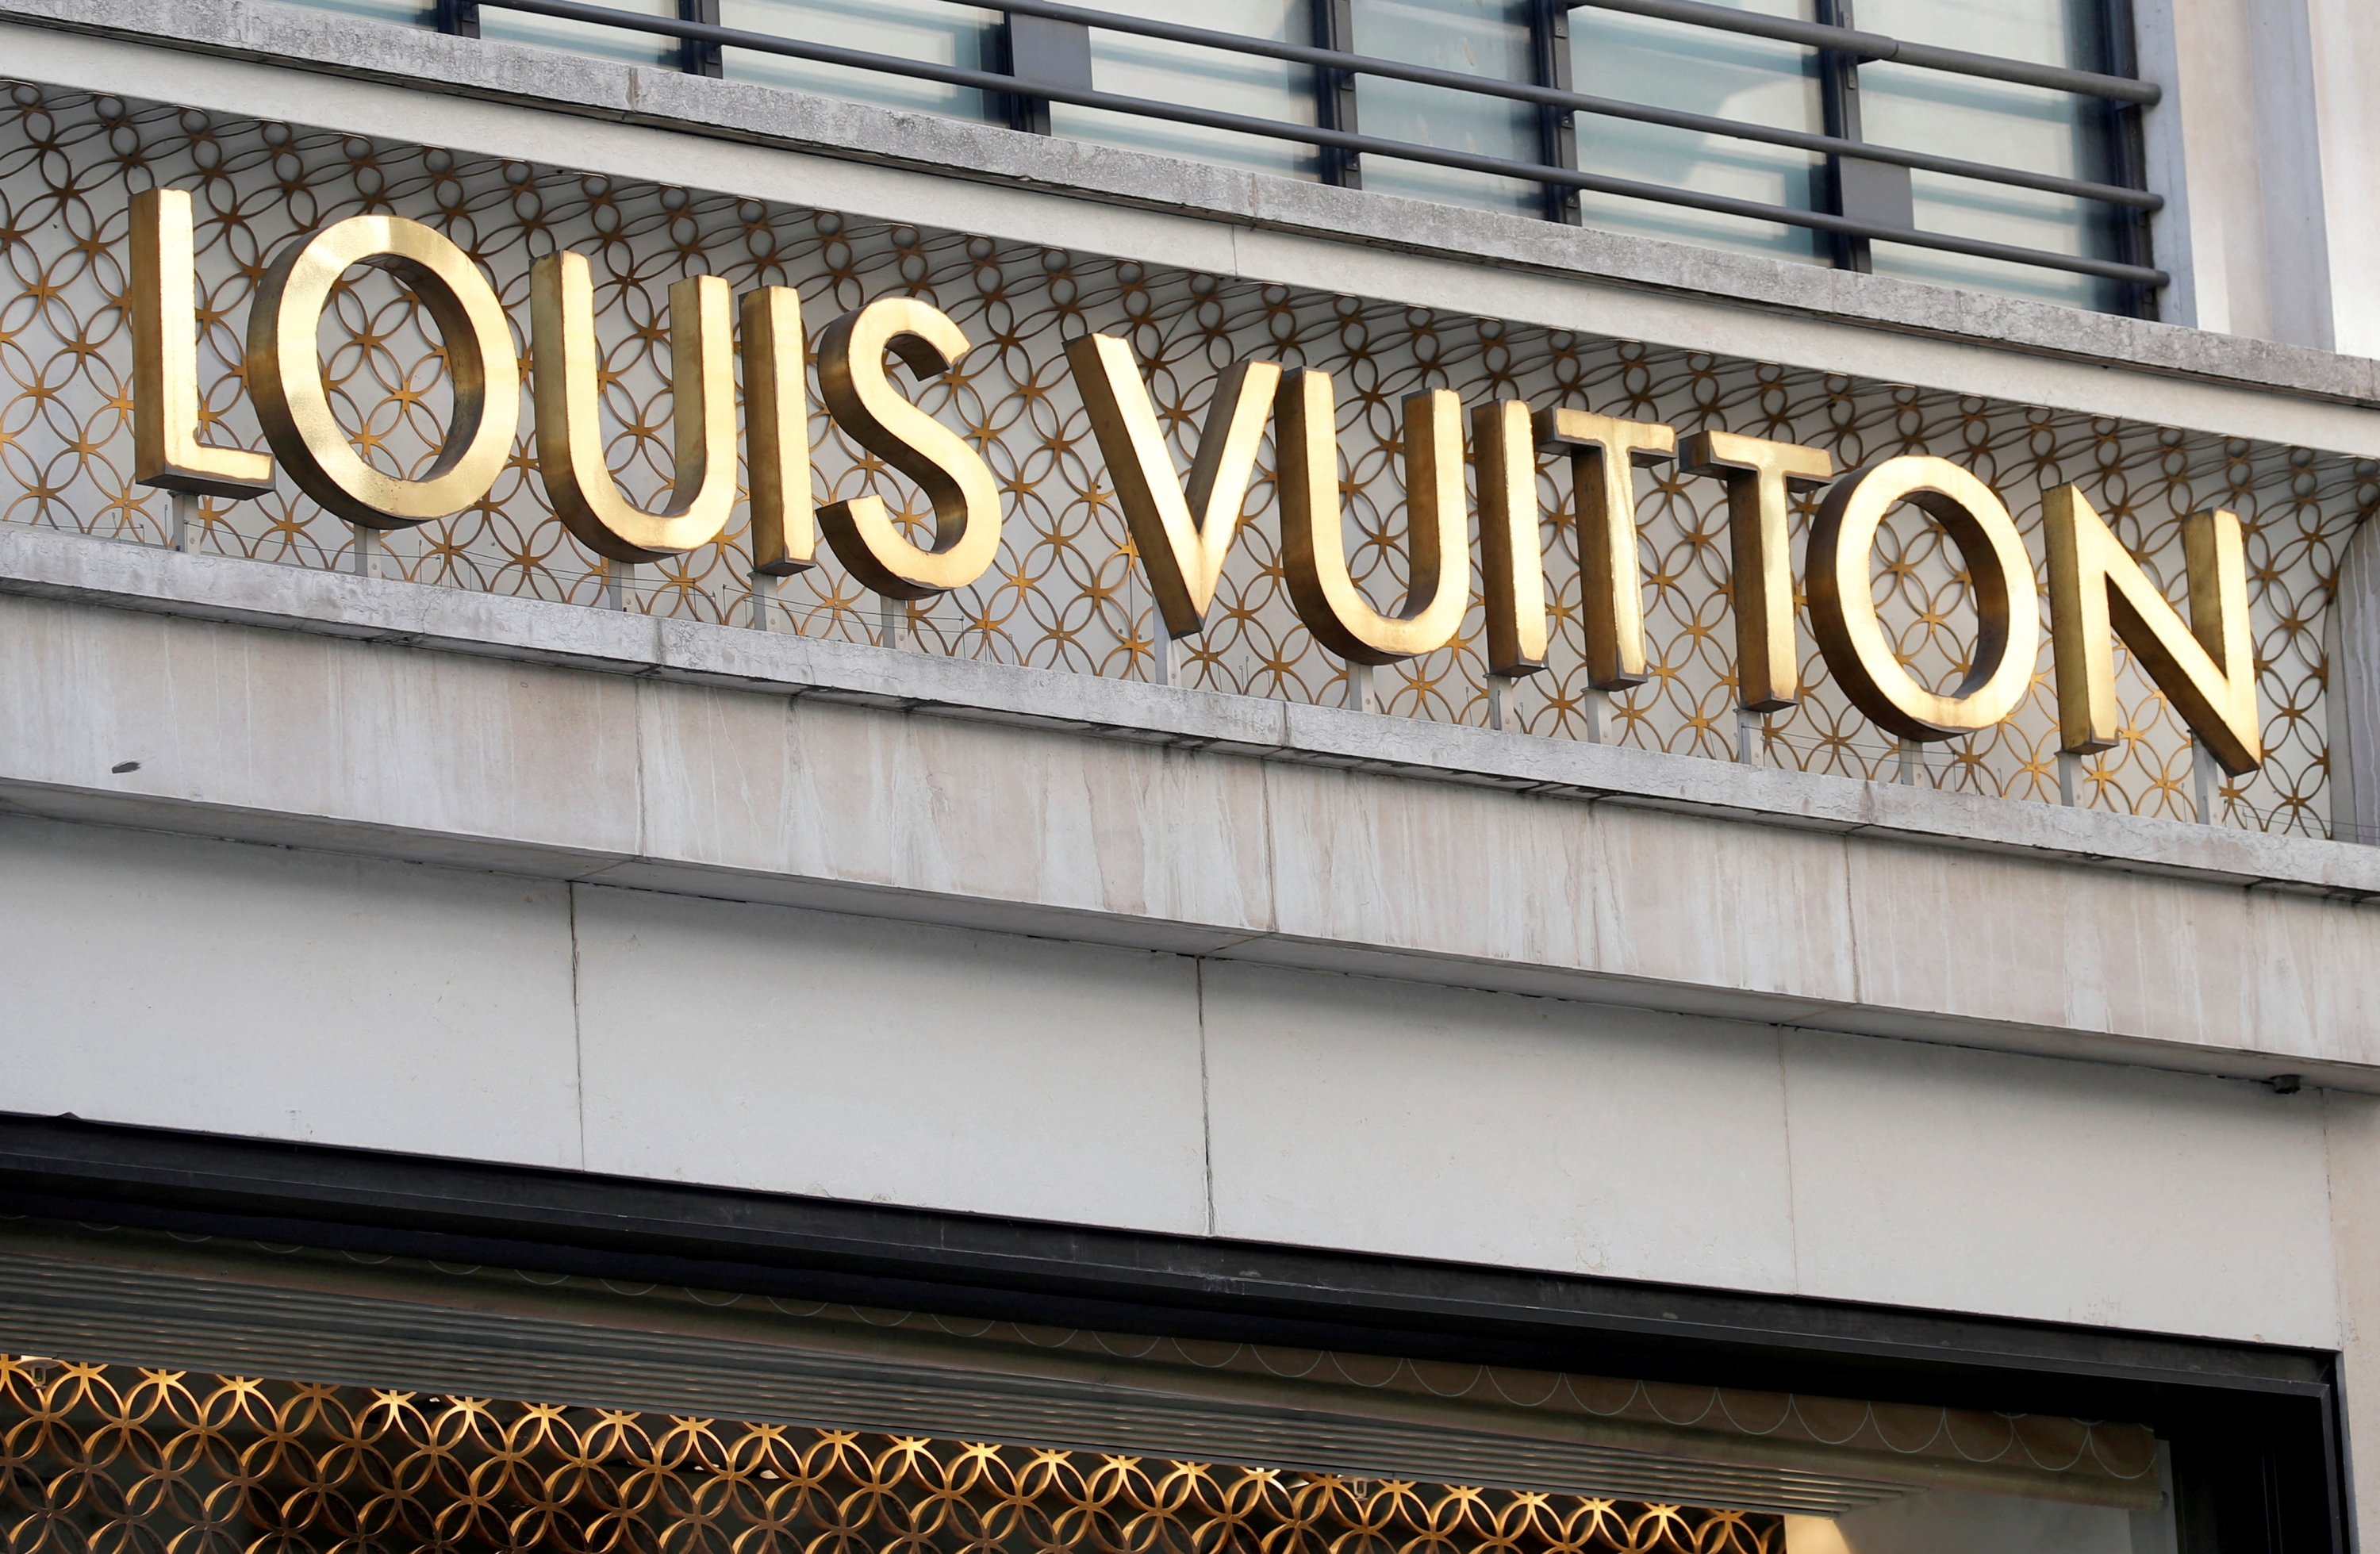 Louis Vuitton Logo Brand and Sign Text Front of Up Store Fashion Shop in  Street View Editorial Photography  Image of city france 221097017